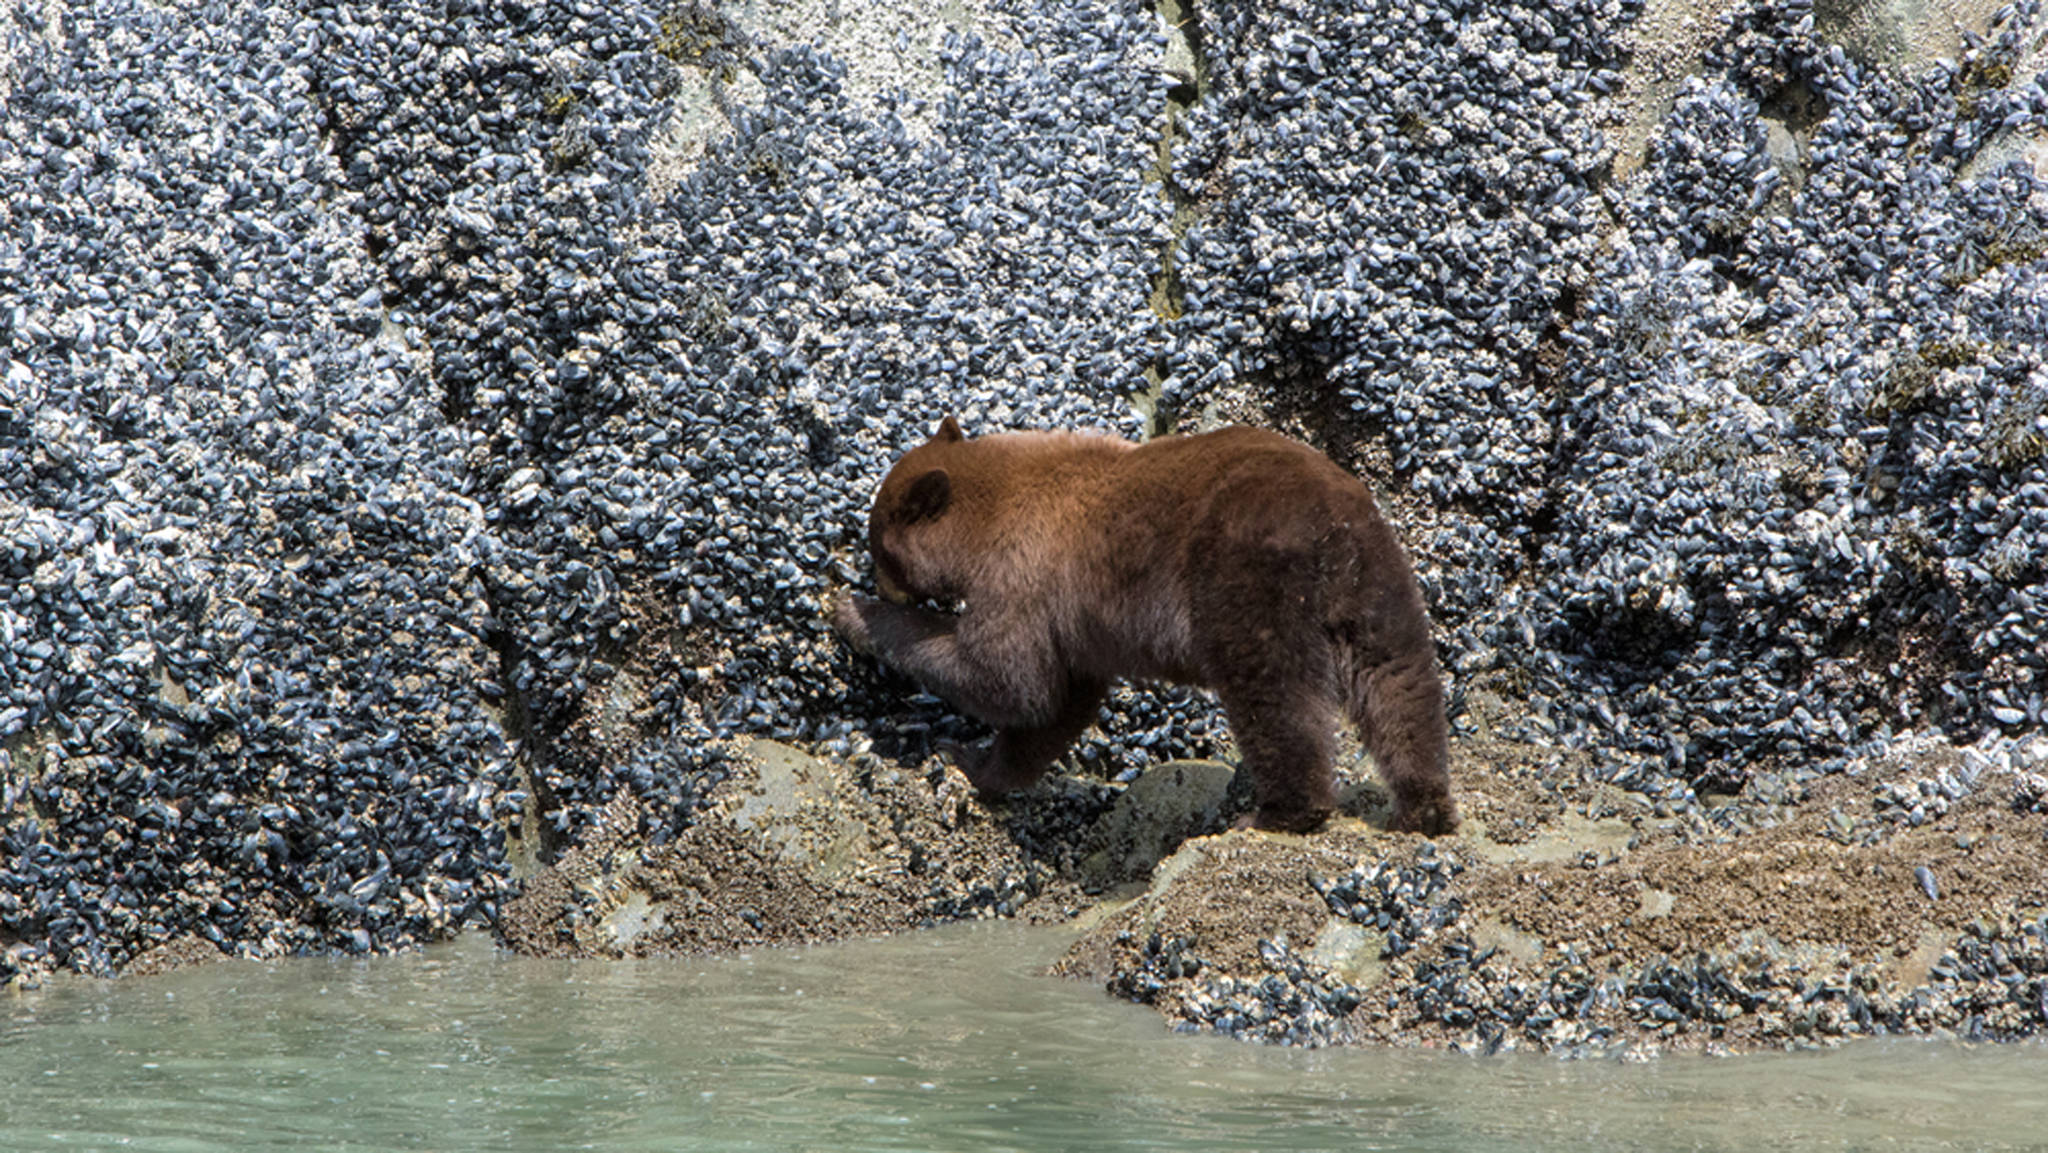 A cinnamon-colored black bear forages on intertidal shellfish on a cliff. (Photo by Joss Bakker)